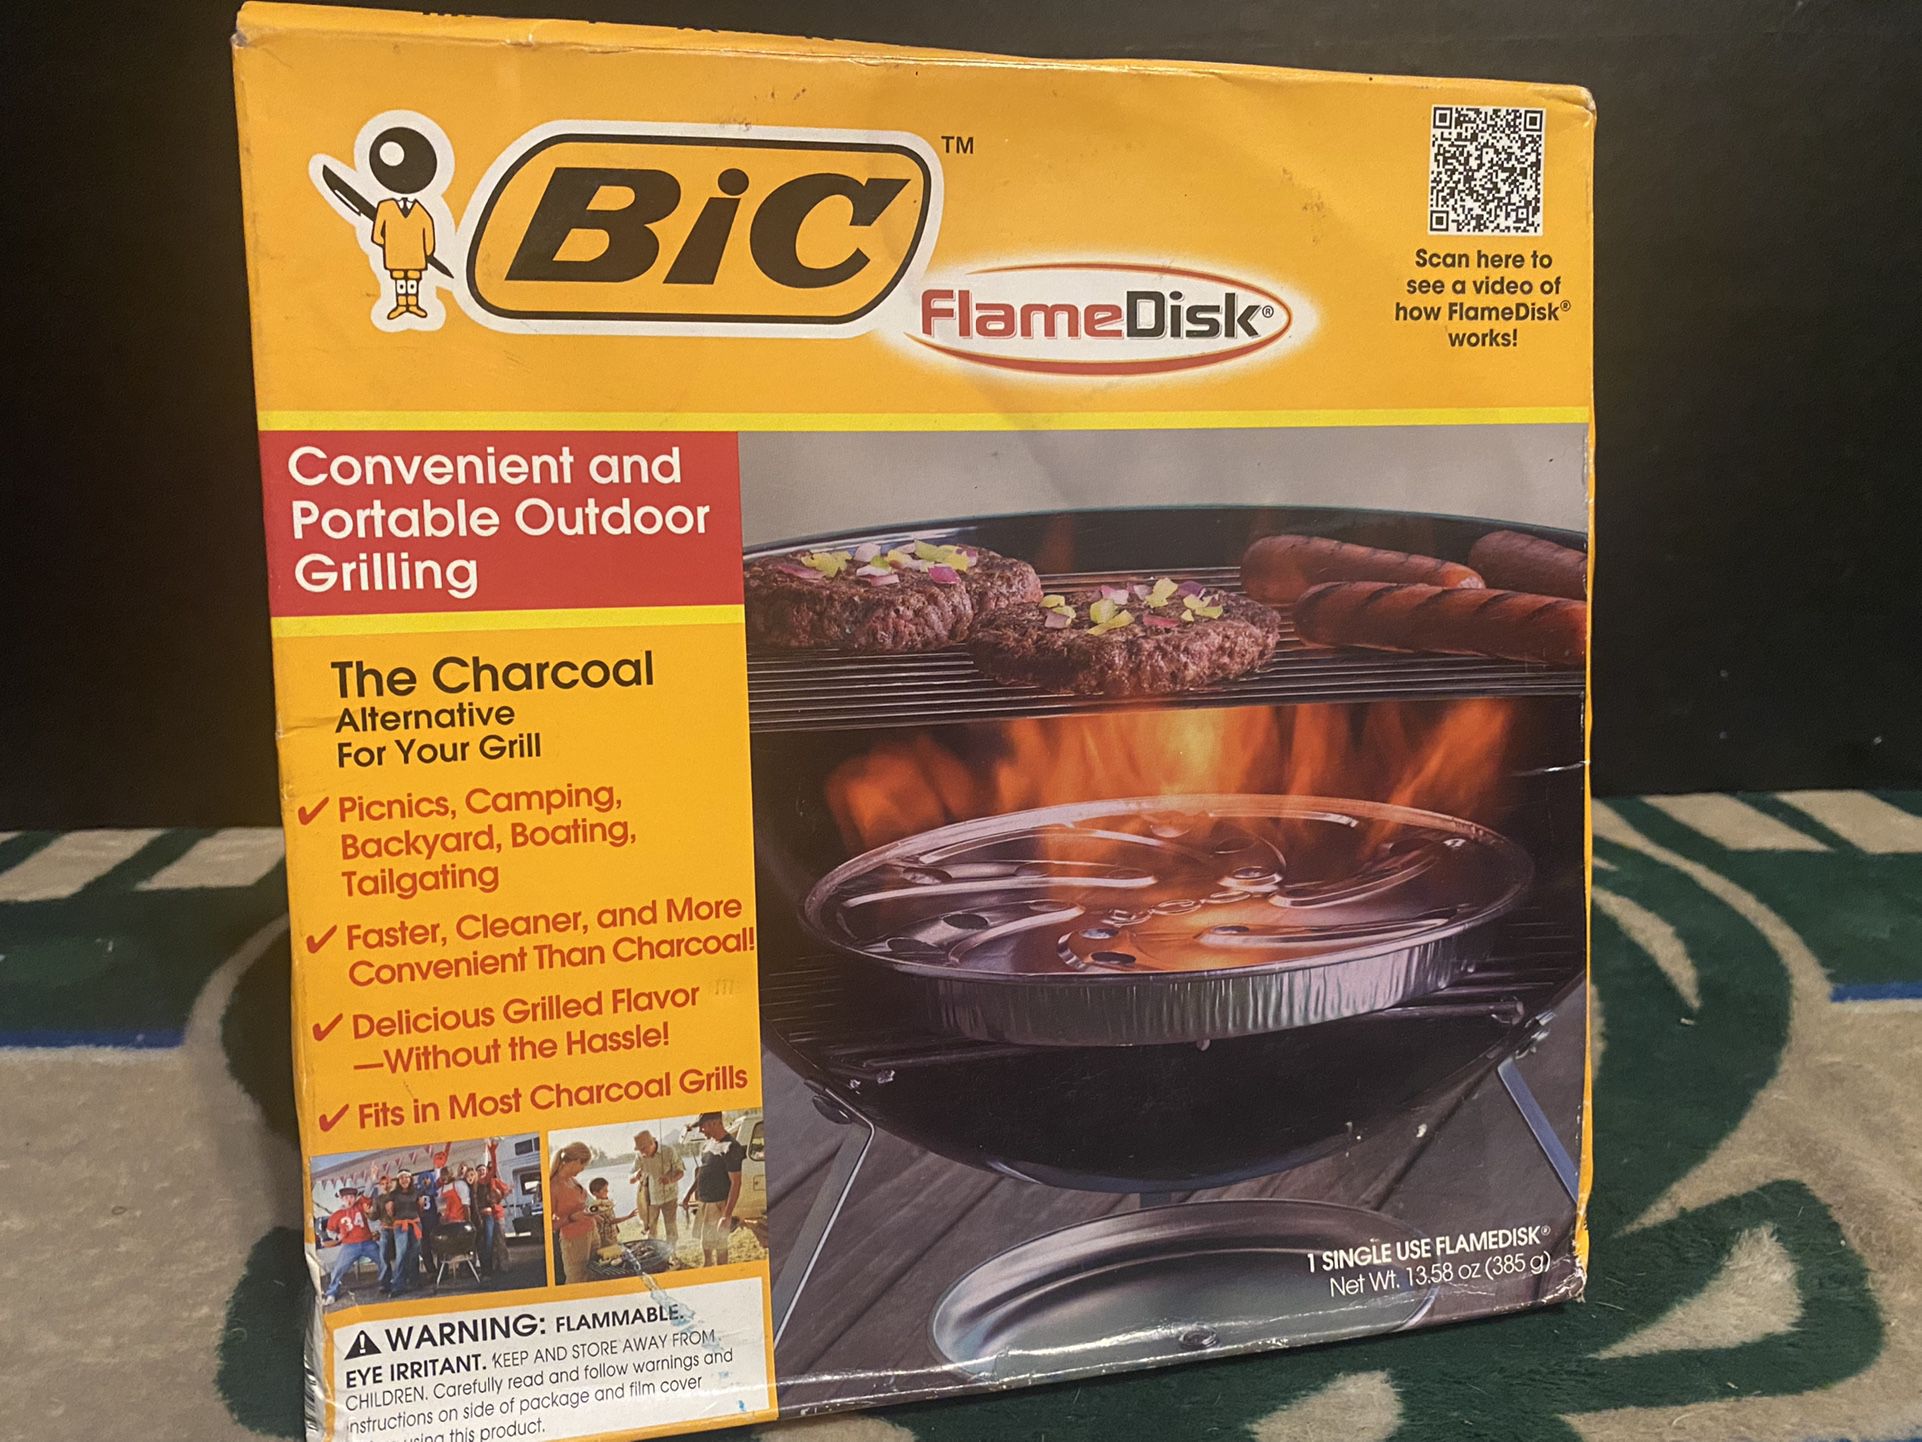 Bic FlameDisk Portable Outdoor Grilling Charcoal Alternative.